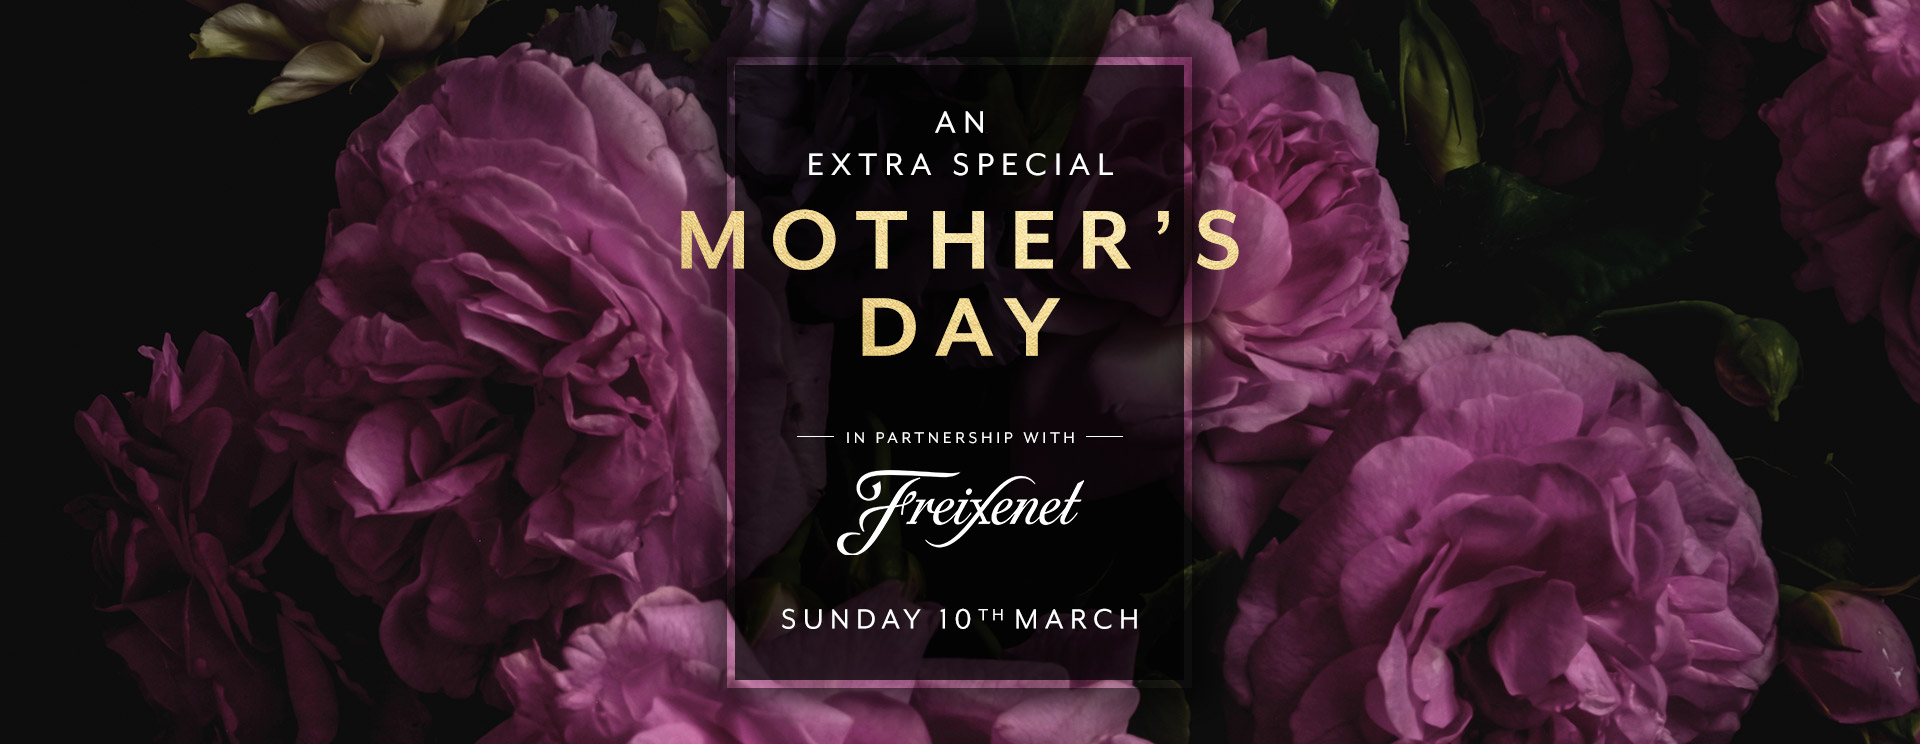 Mother’s Day menu/meal in Bath